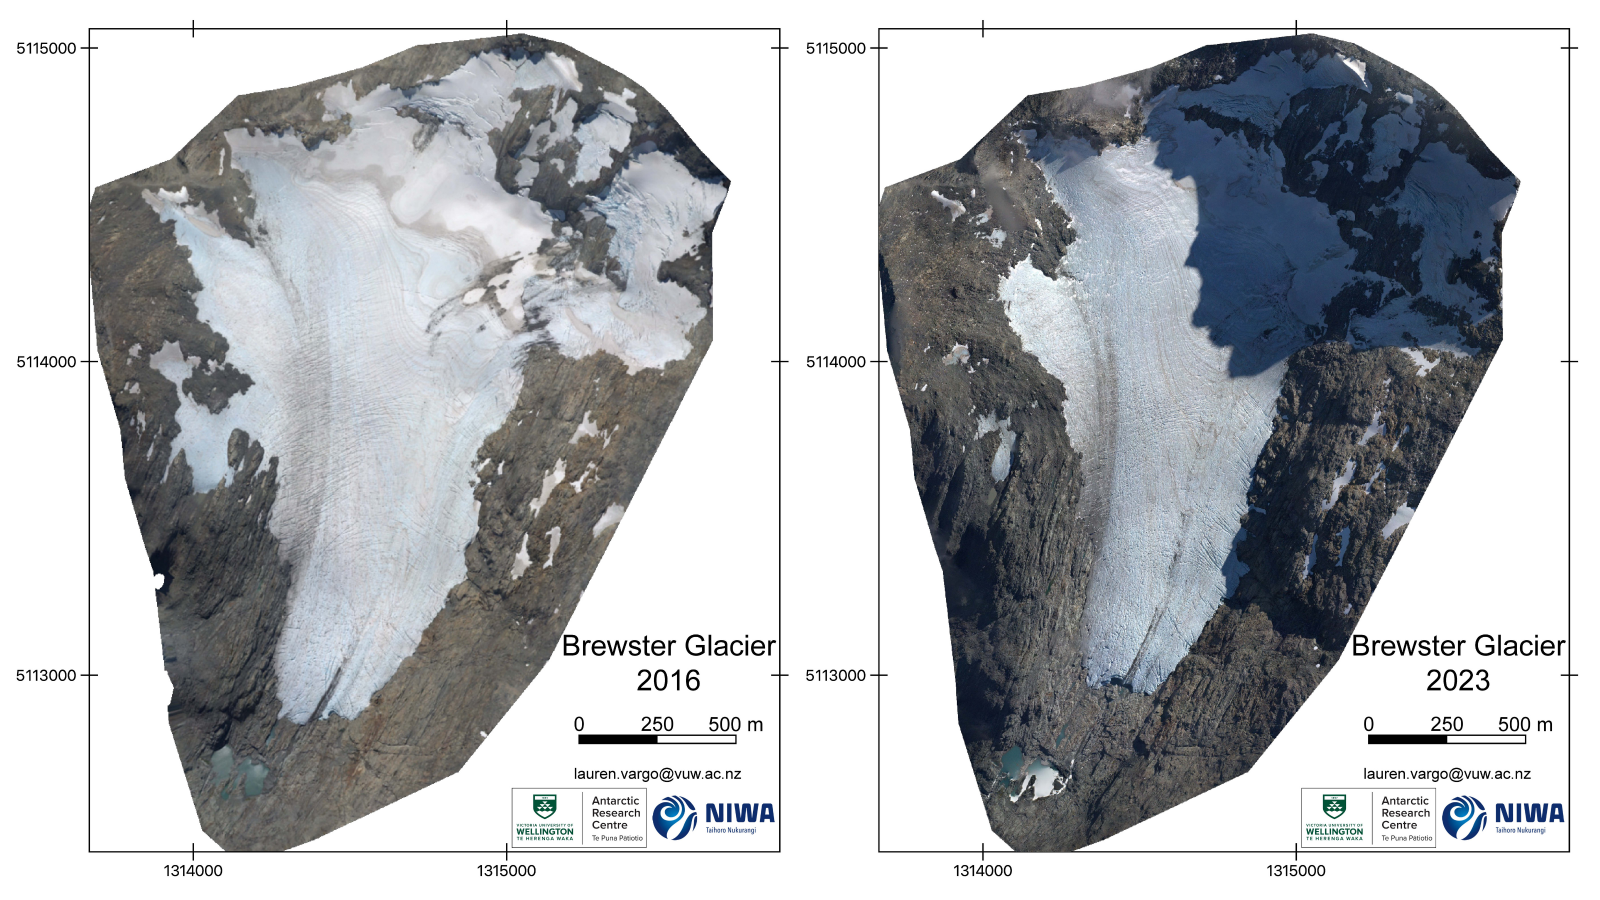 Two aerial images of glaciers side by side, one with distinctly less ice coverage than the other.